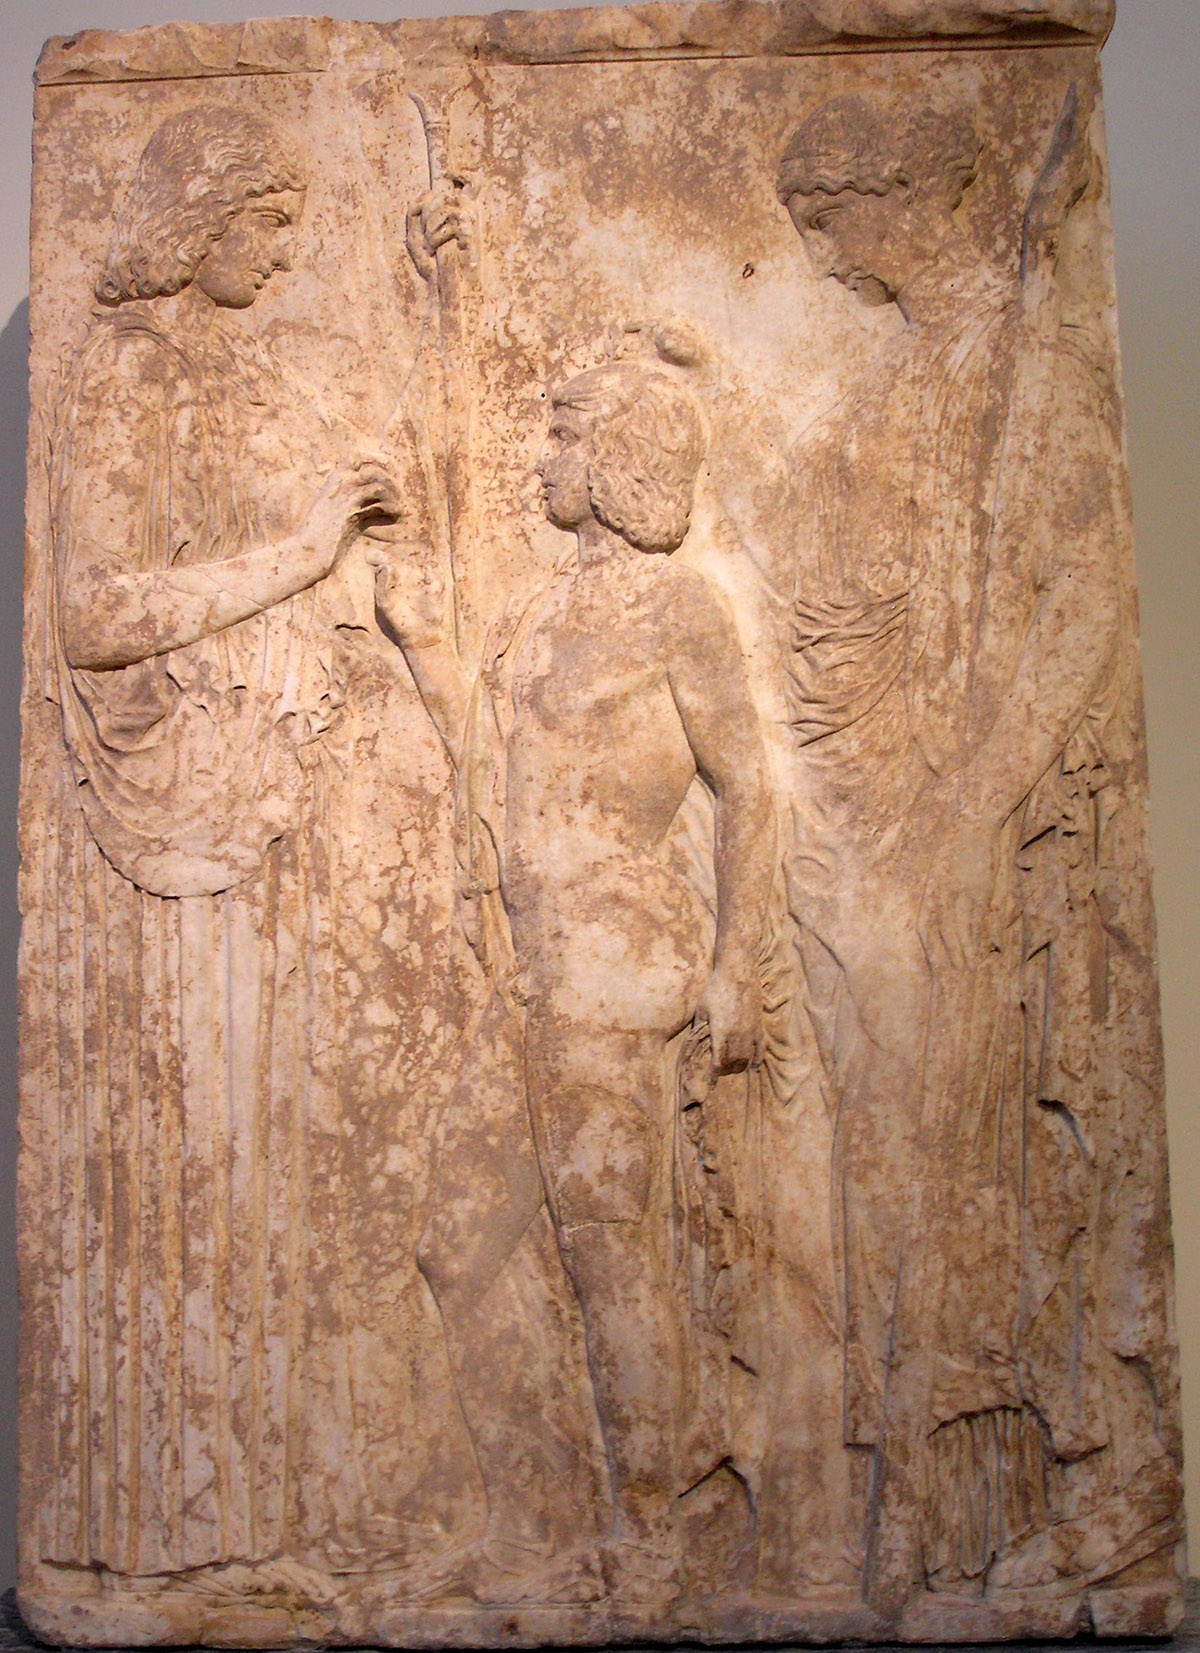 Demeter presents Triptolemus with sheafs of wheat, while Persephone lays her hand in blessing